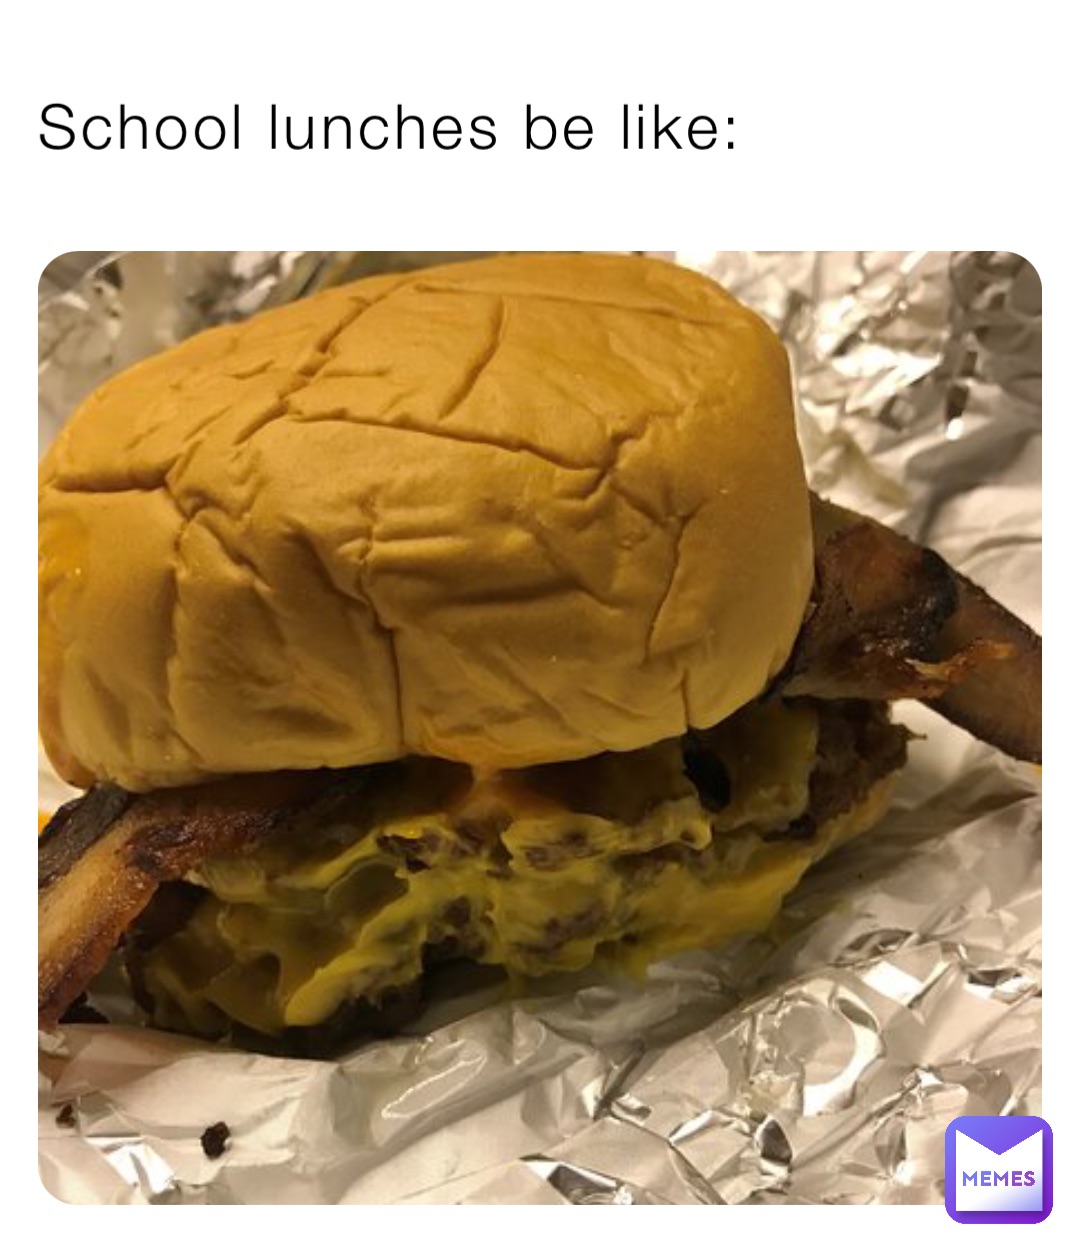 School lunches be like: